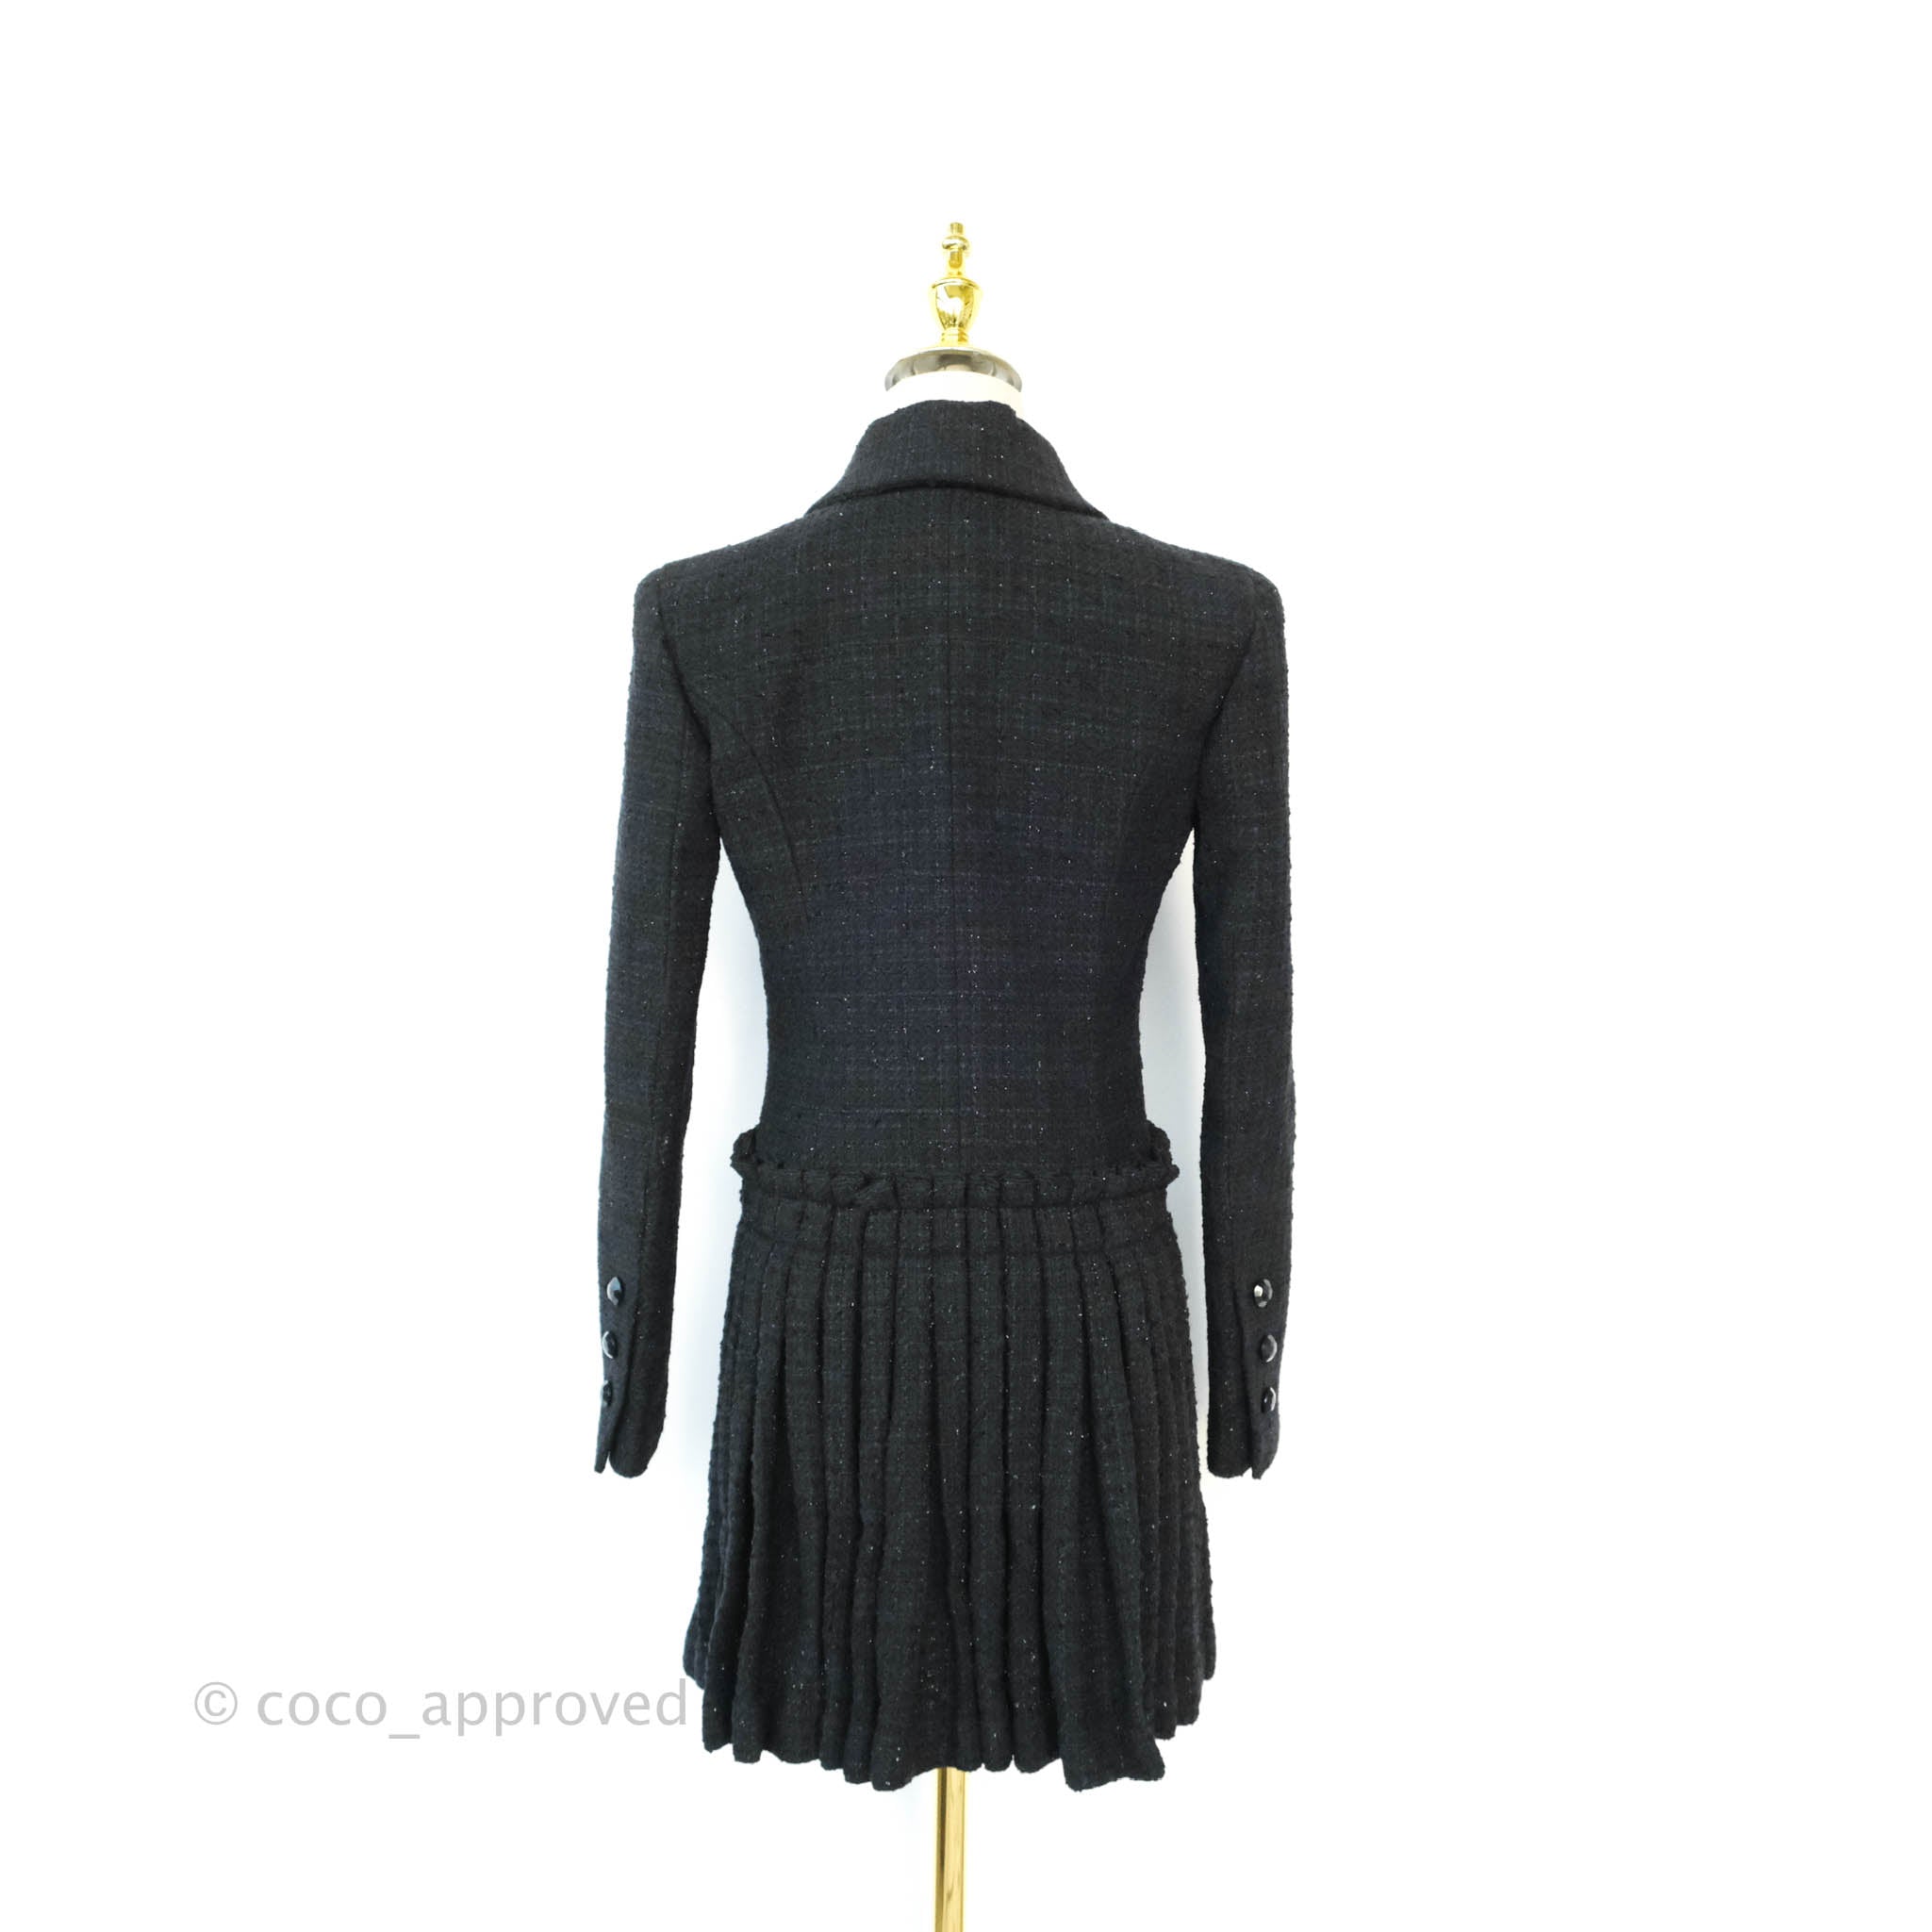 CHANEL COAT FROM 2008 FALL COLLECTION